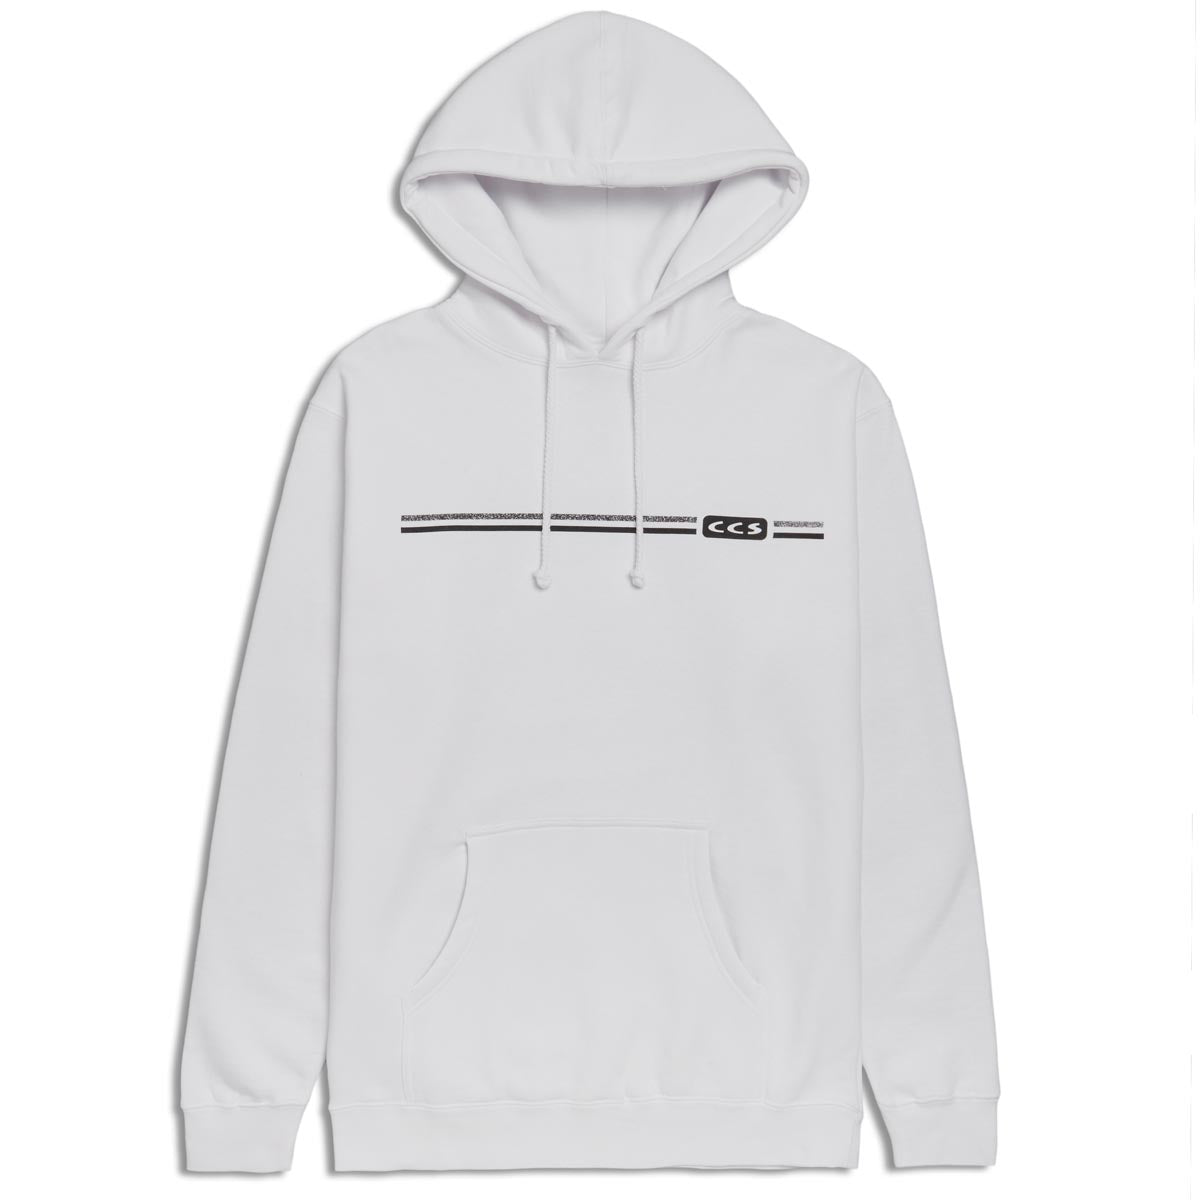 CCS Noise Hoodie - White image 2